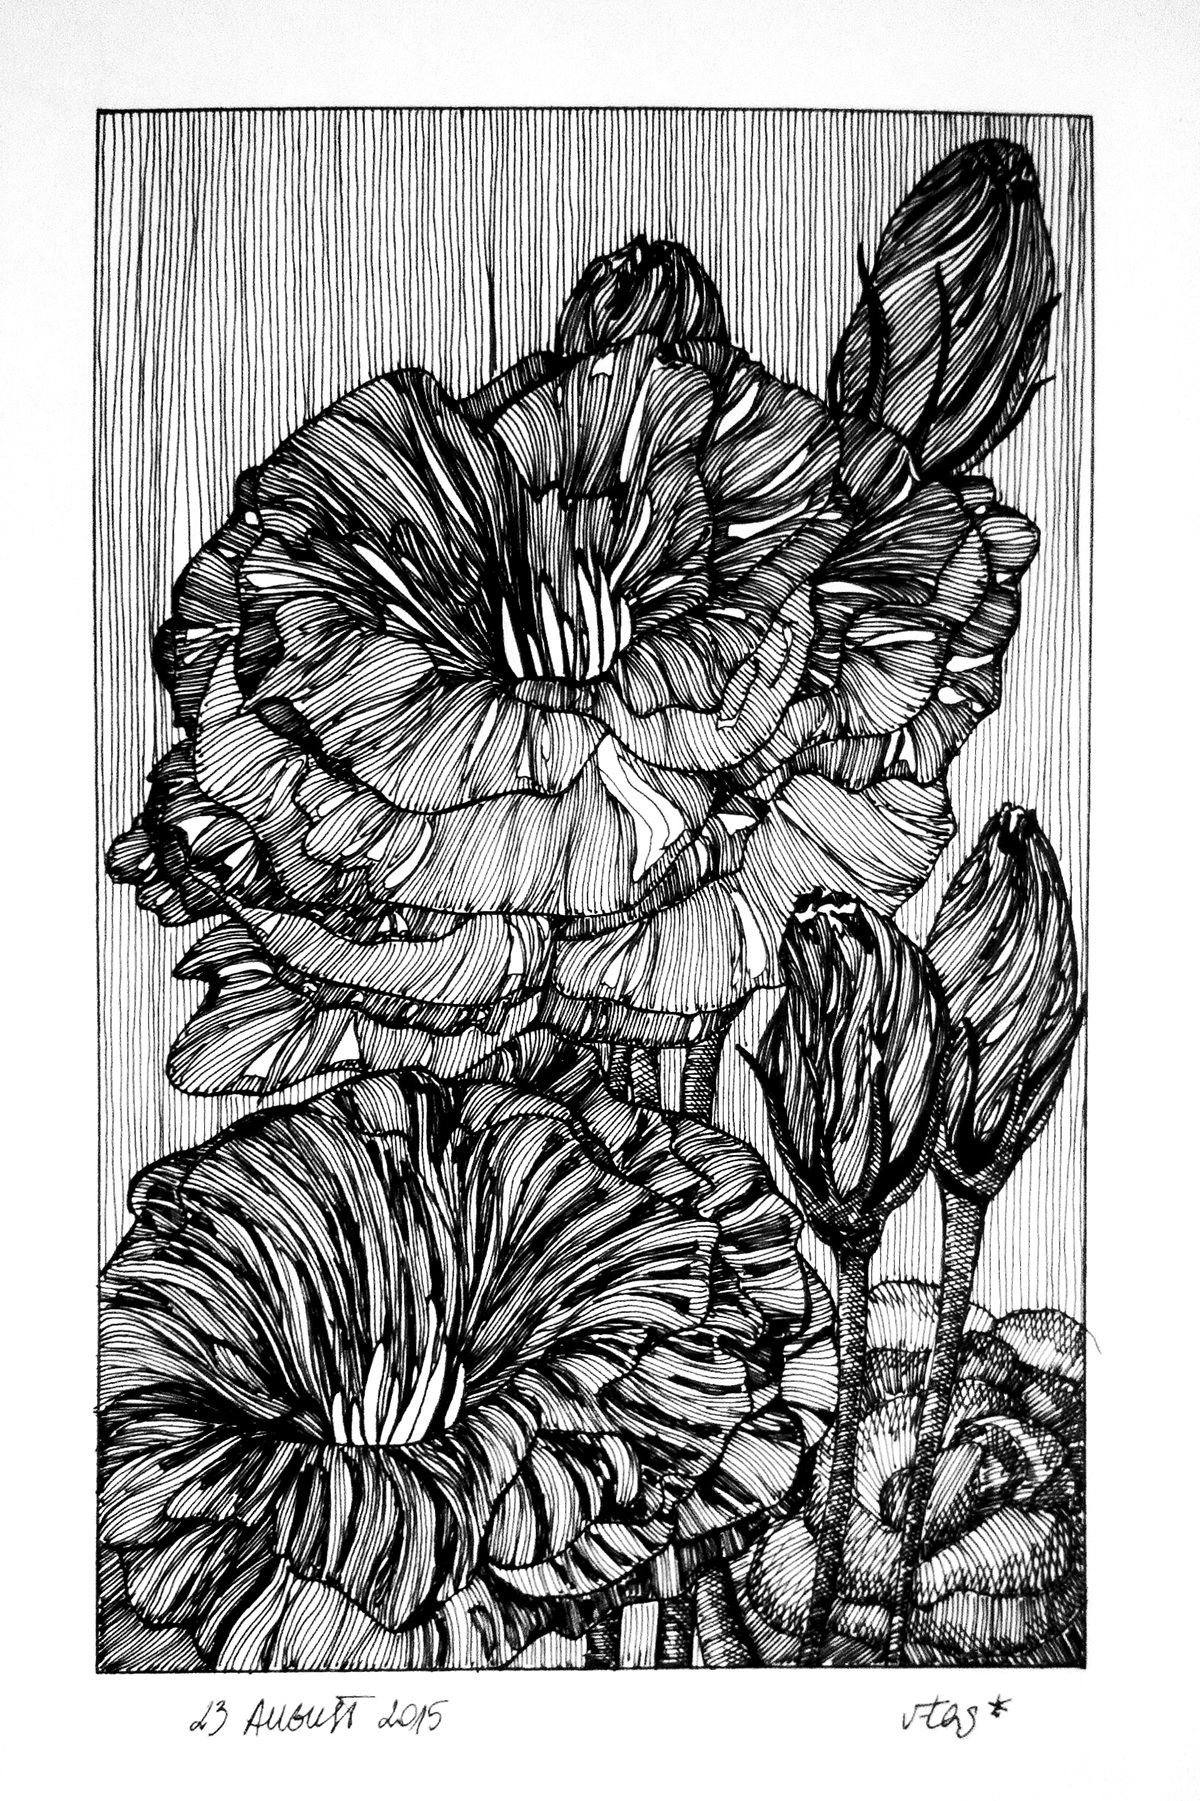 drawing a day daily drawing drawing challenge graphics hatching lines fines lines linear lining Original creative inspiration Nature Flowers blossoms